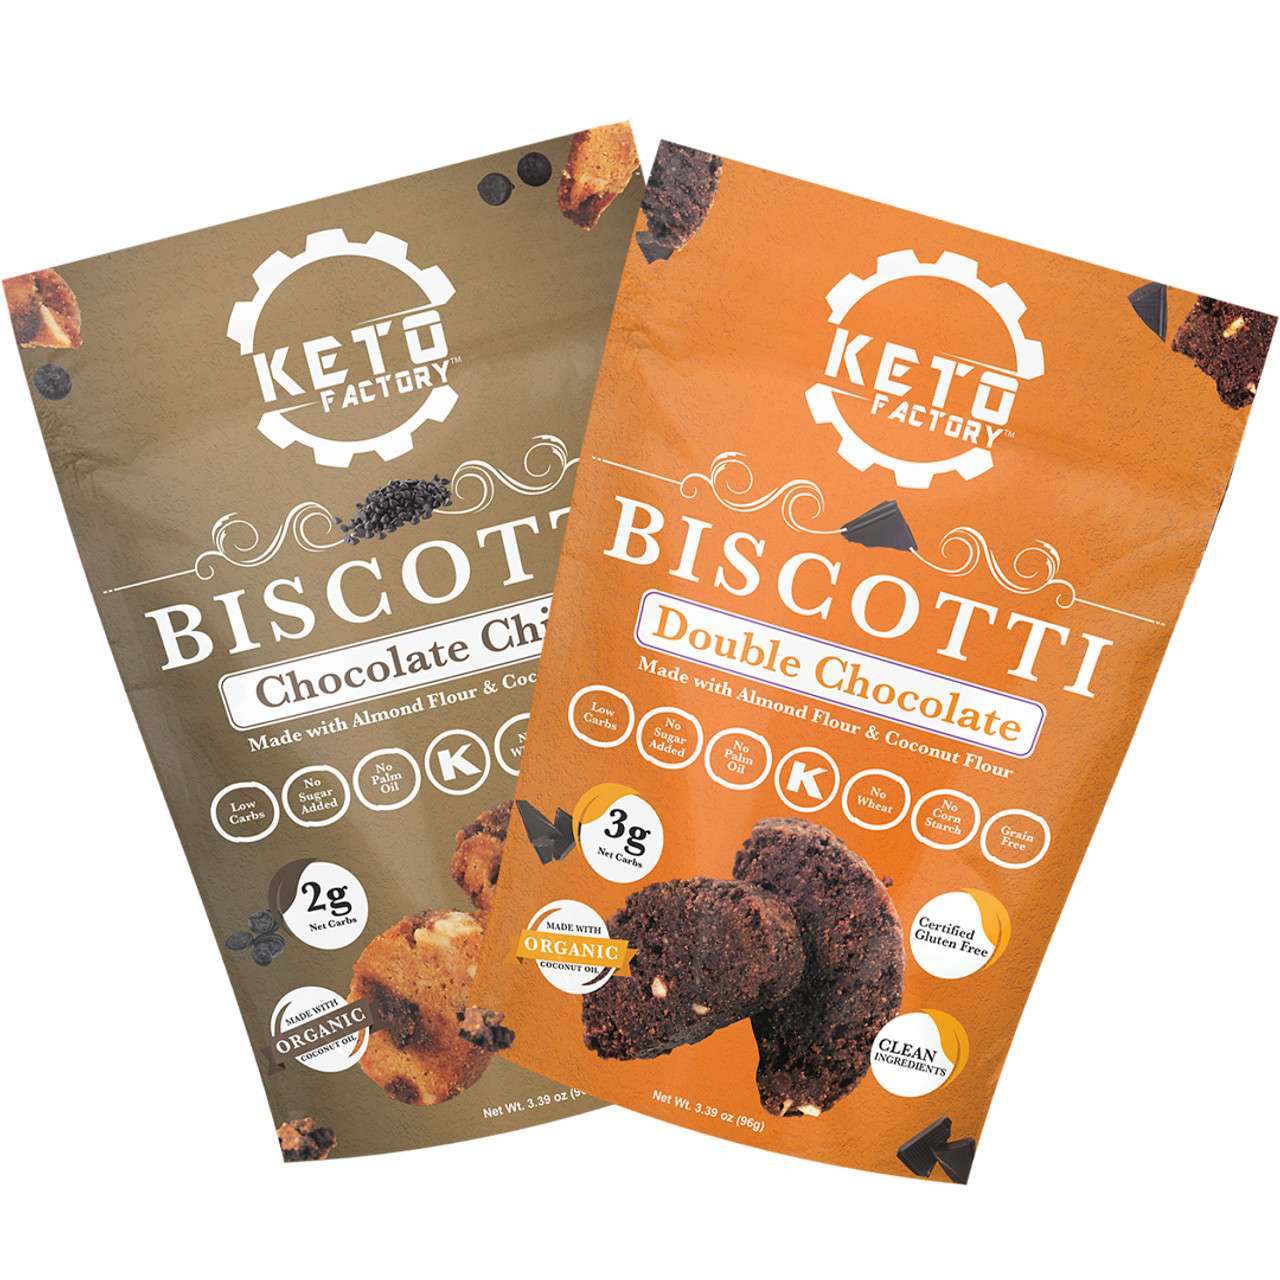 Double Chocolate and Chocolate Chip KETO BISCOTTI – pack of 2